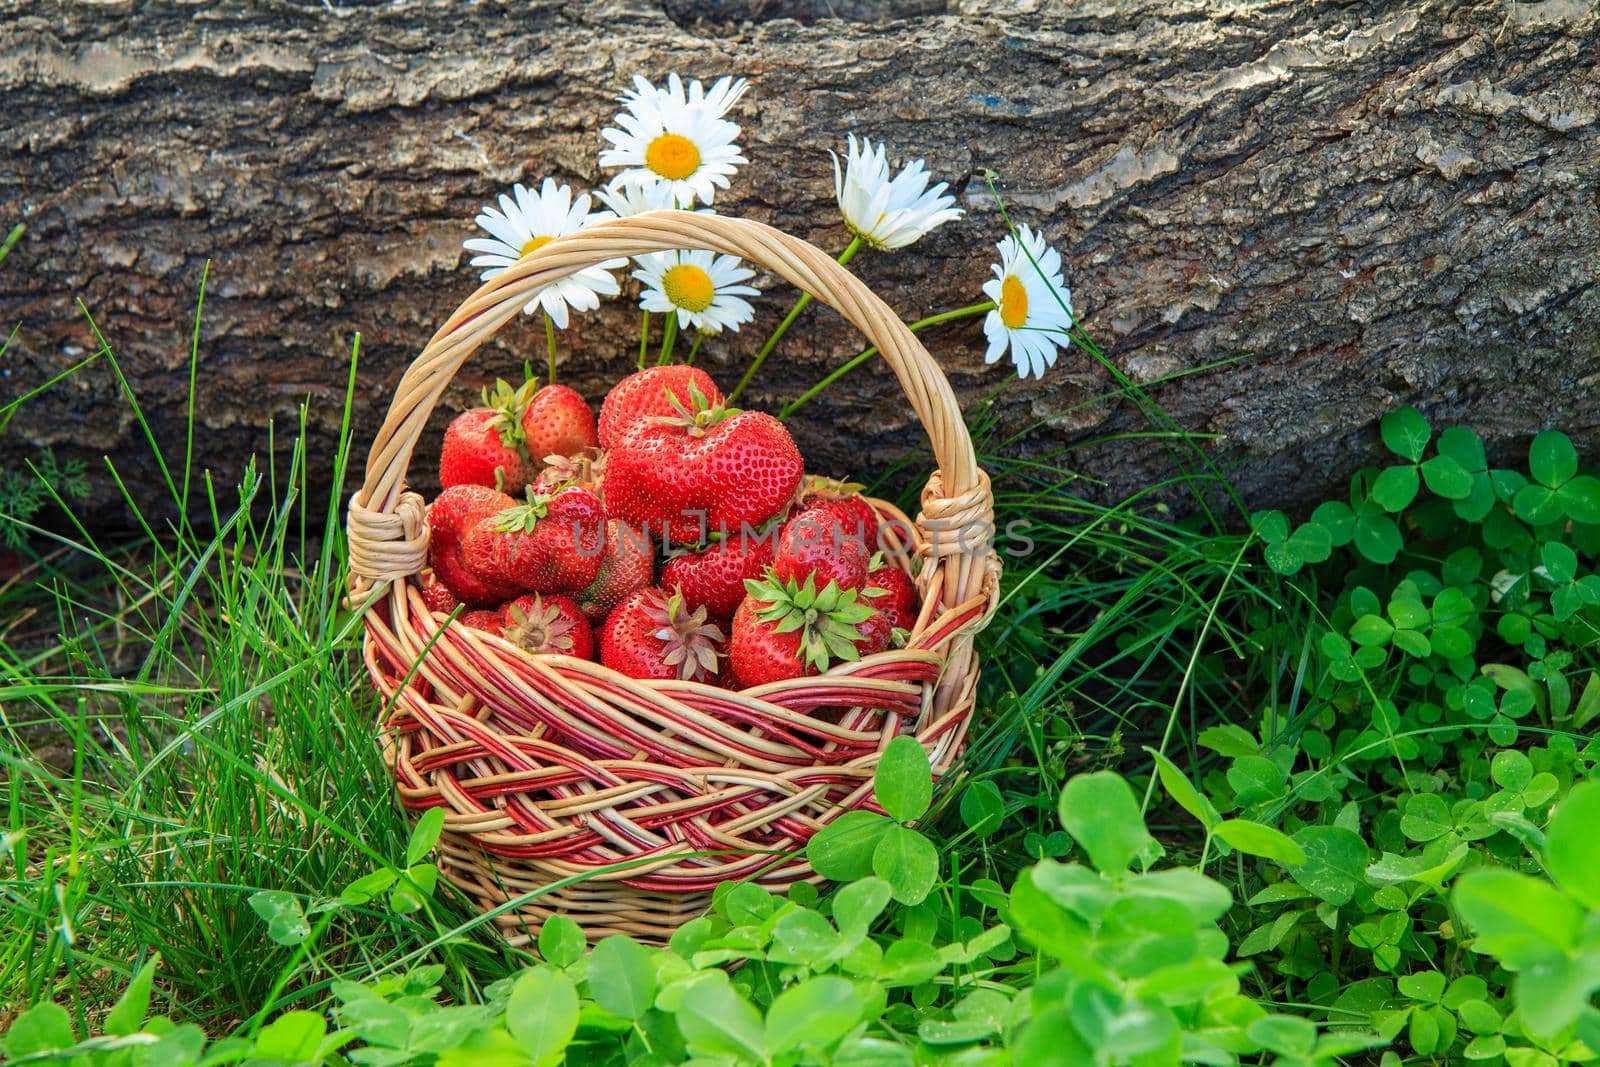 Full basket with fresh picked red ripe strawberries on green grass and tree trunk on the background